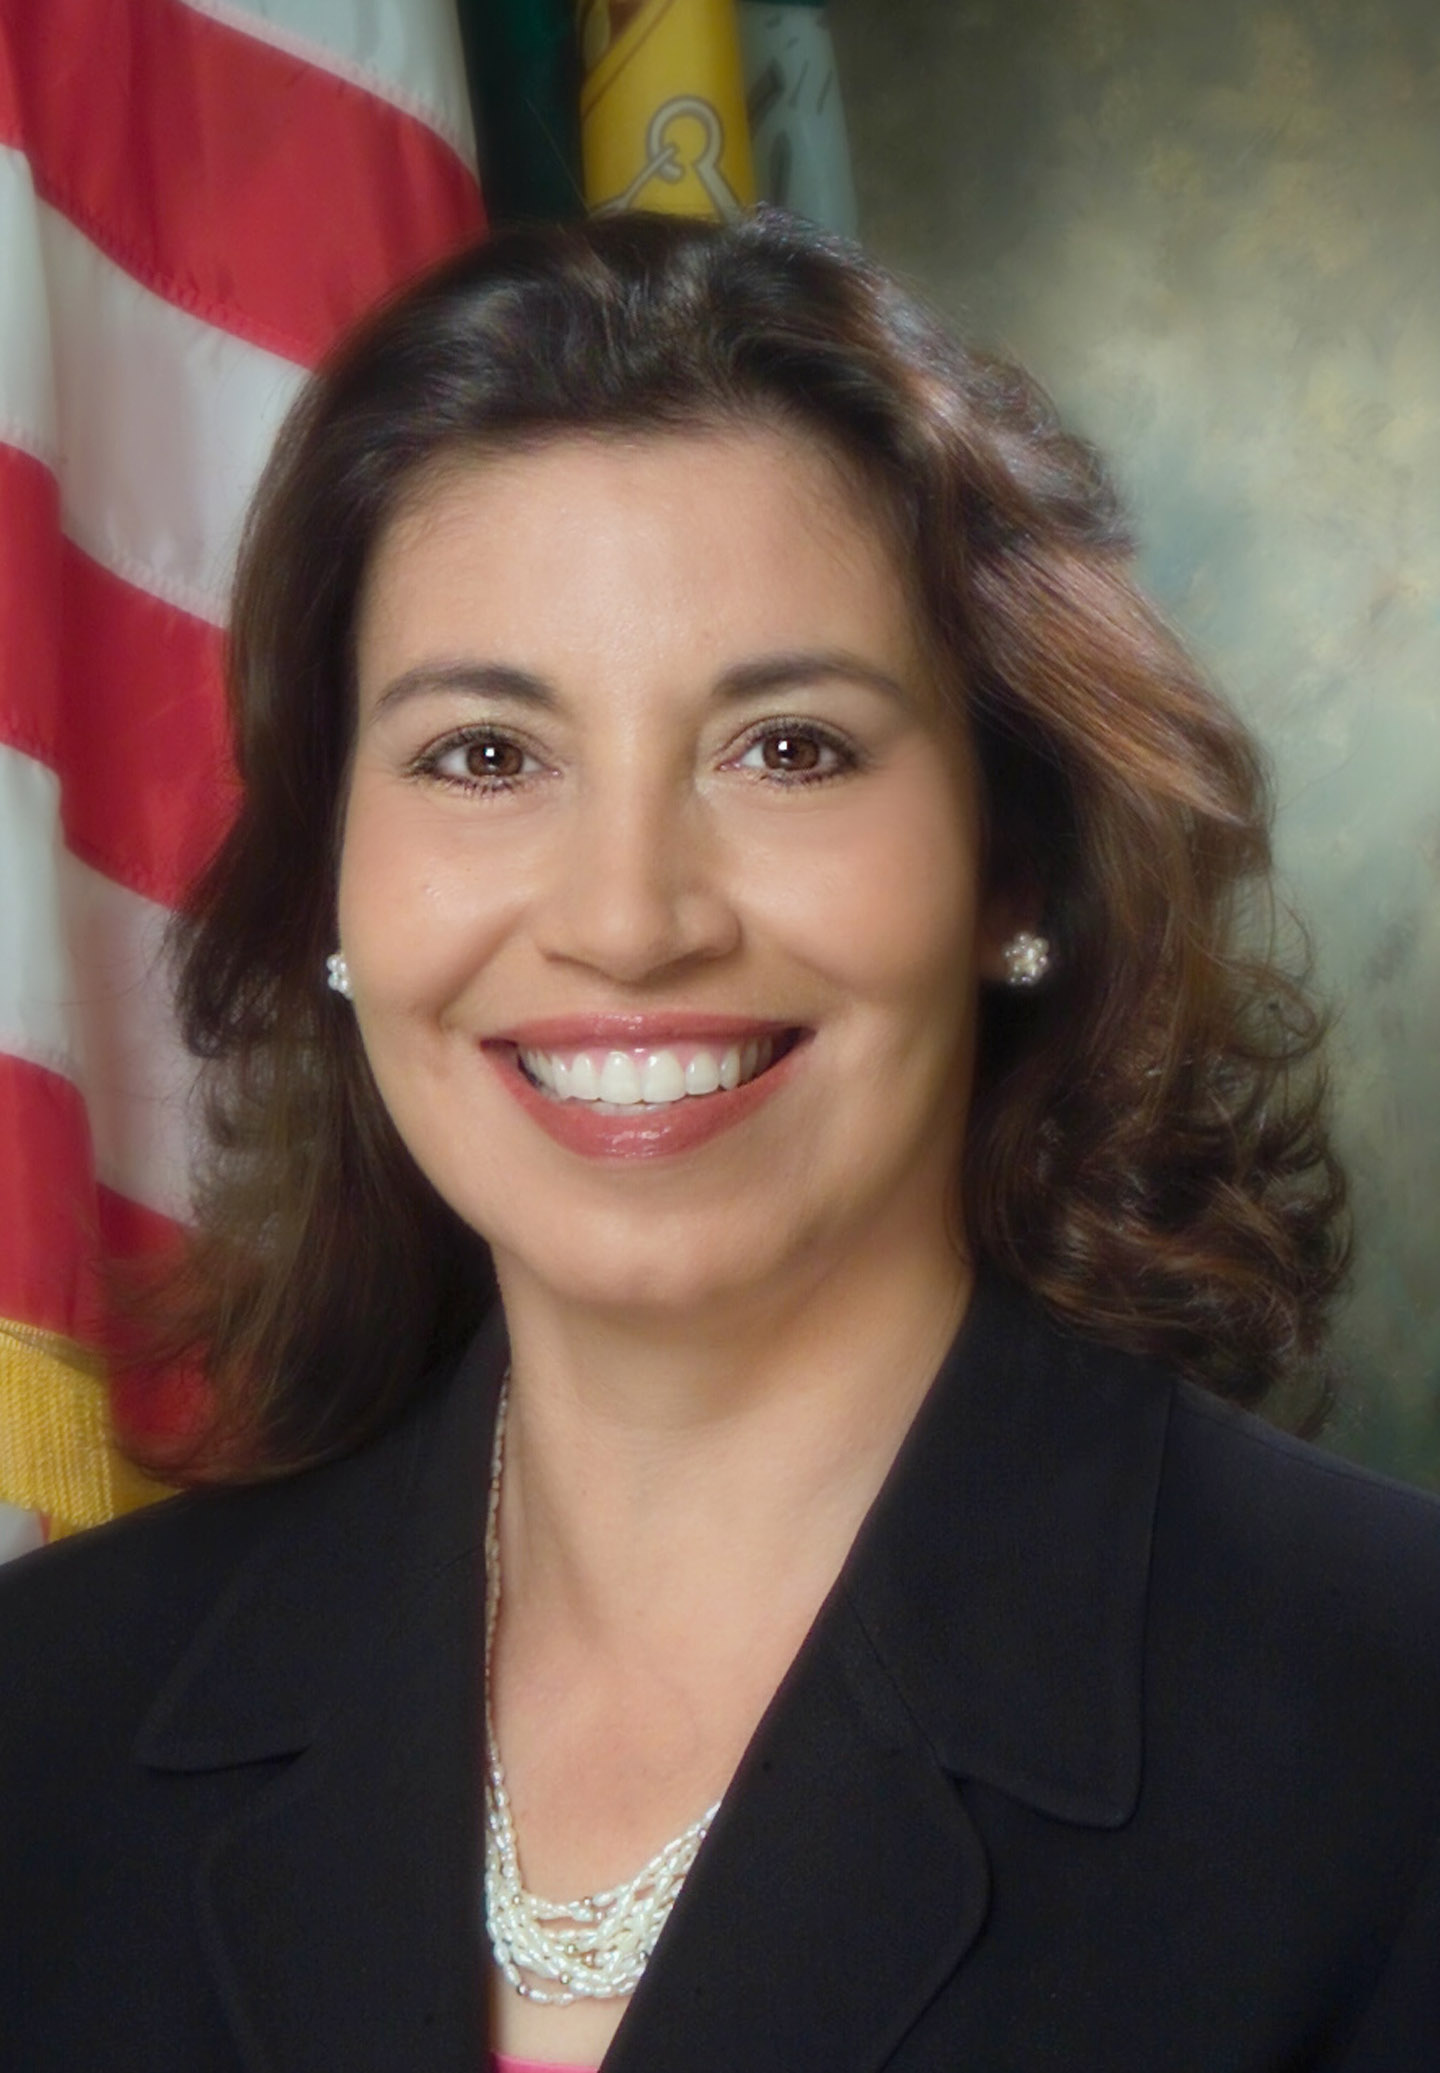 enlarged image for Anna Escobedo Cabral, the 42nd United States Treasurer, to Sign PMG Labels